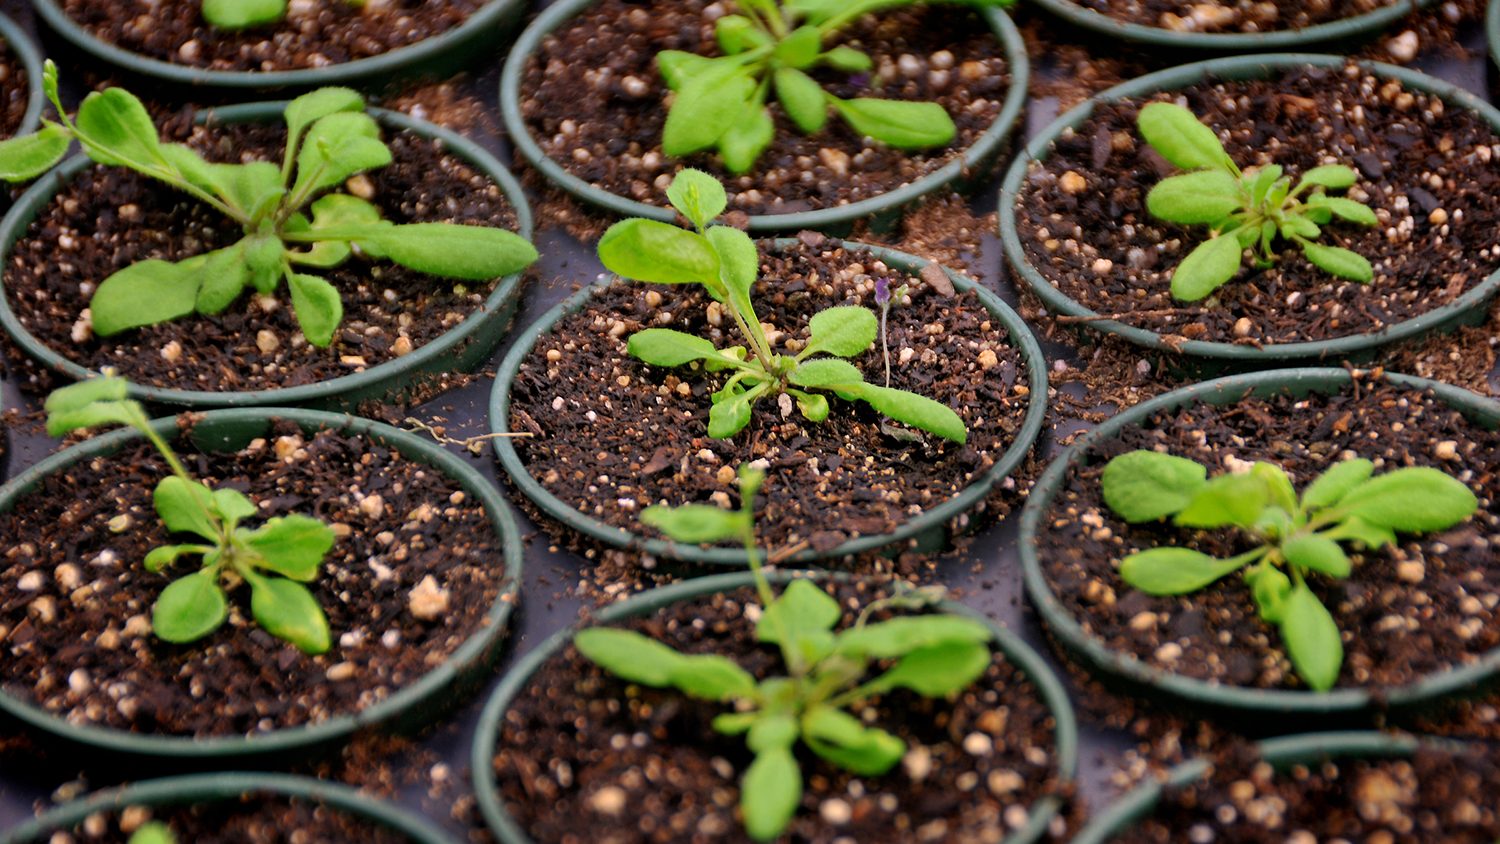 Seven seedlings in containers